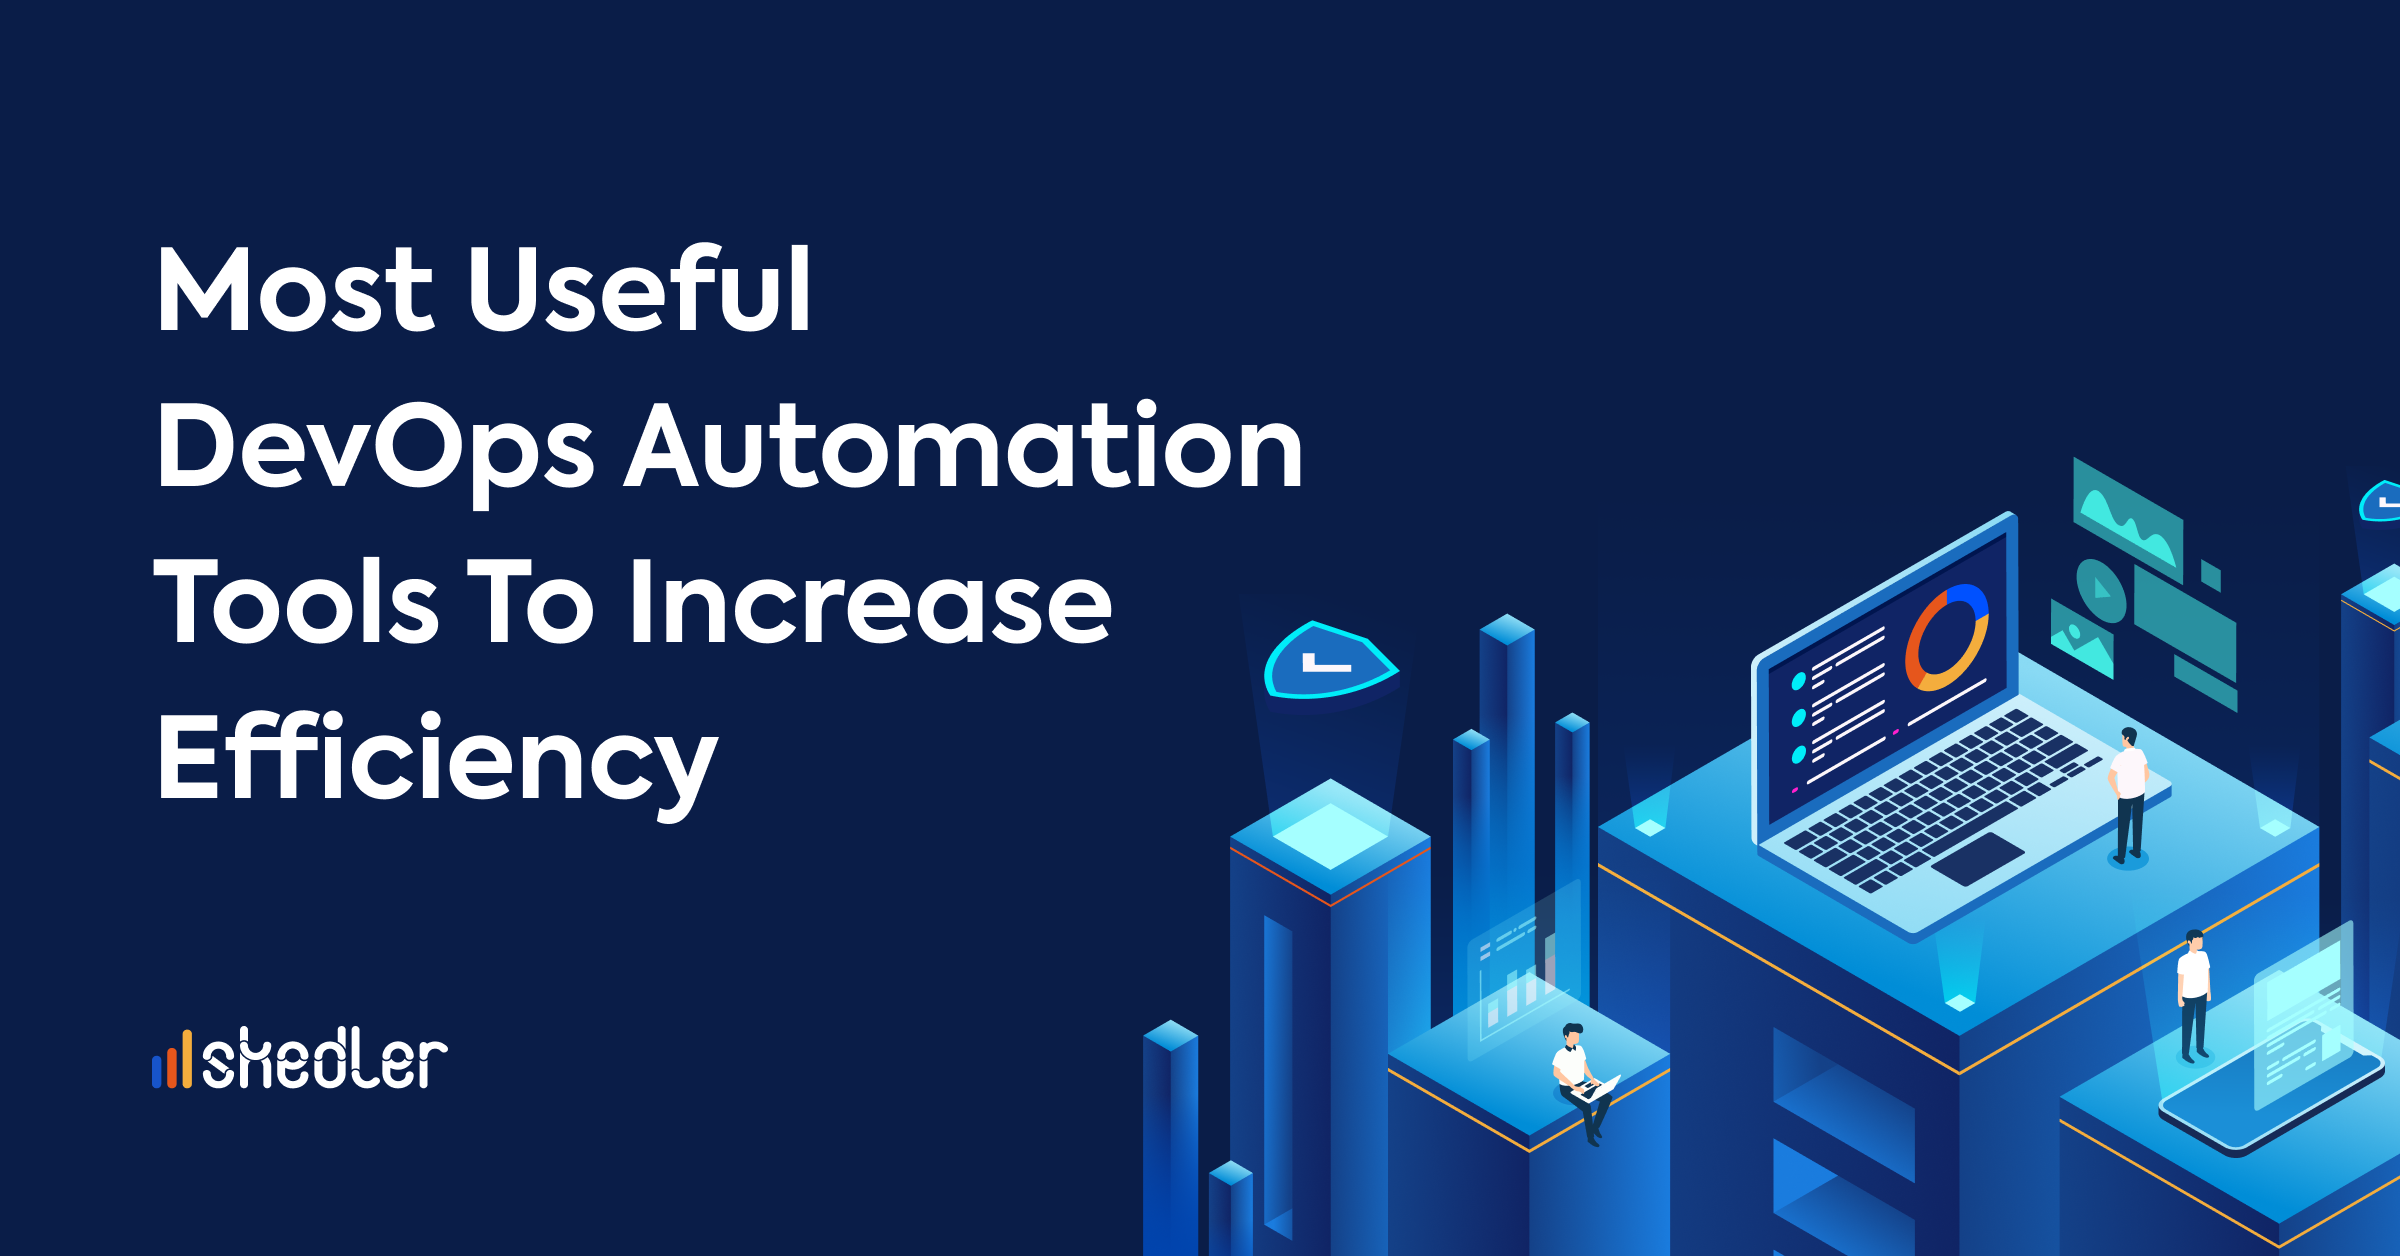 Most useful devops automation tools to increase efficiency